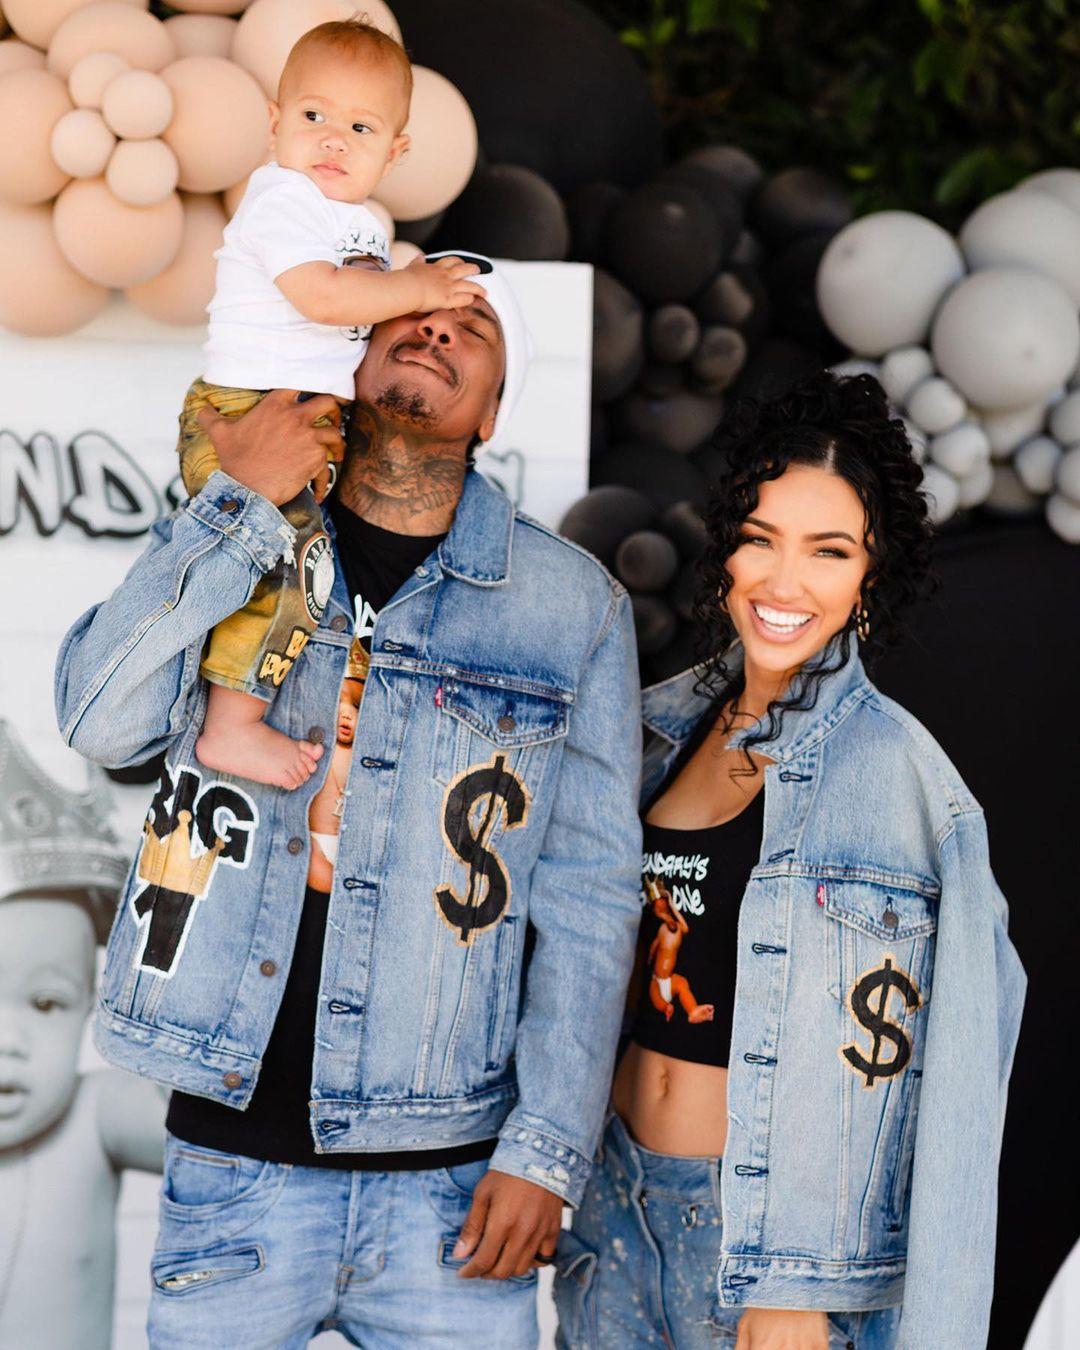 Bre Tiesi and Nick Cannon celebrate as son Legendary celebrates his 1st birthday